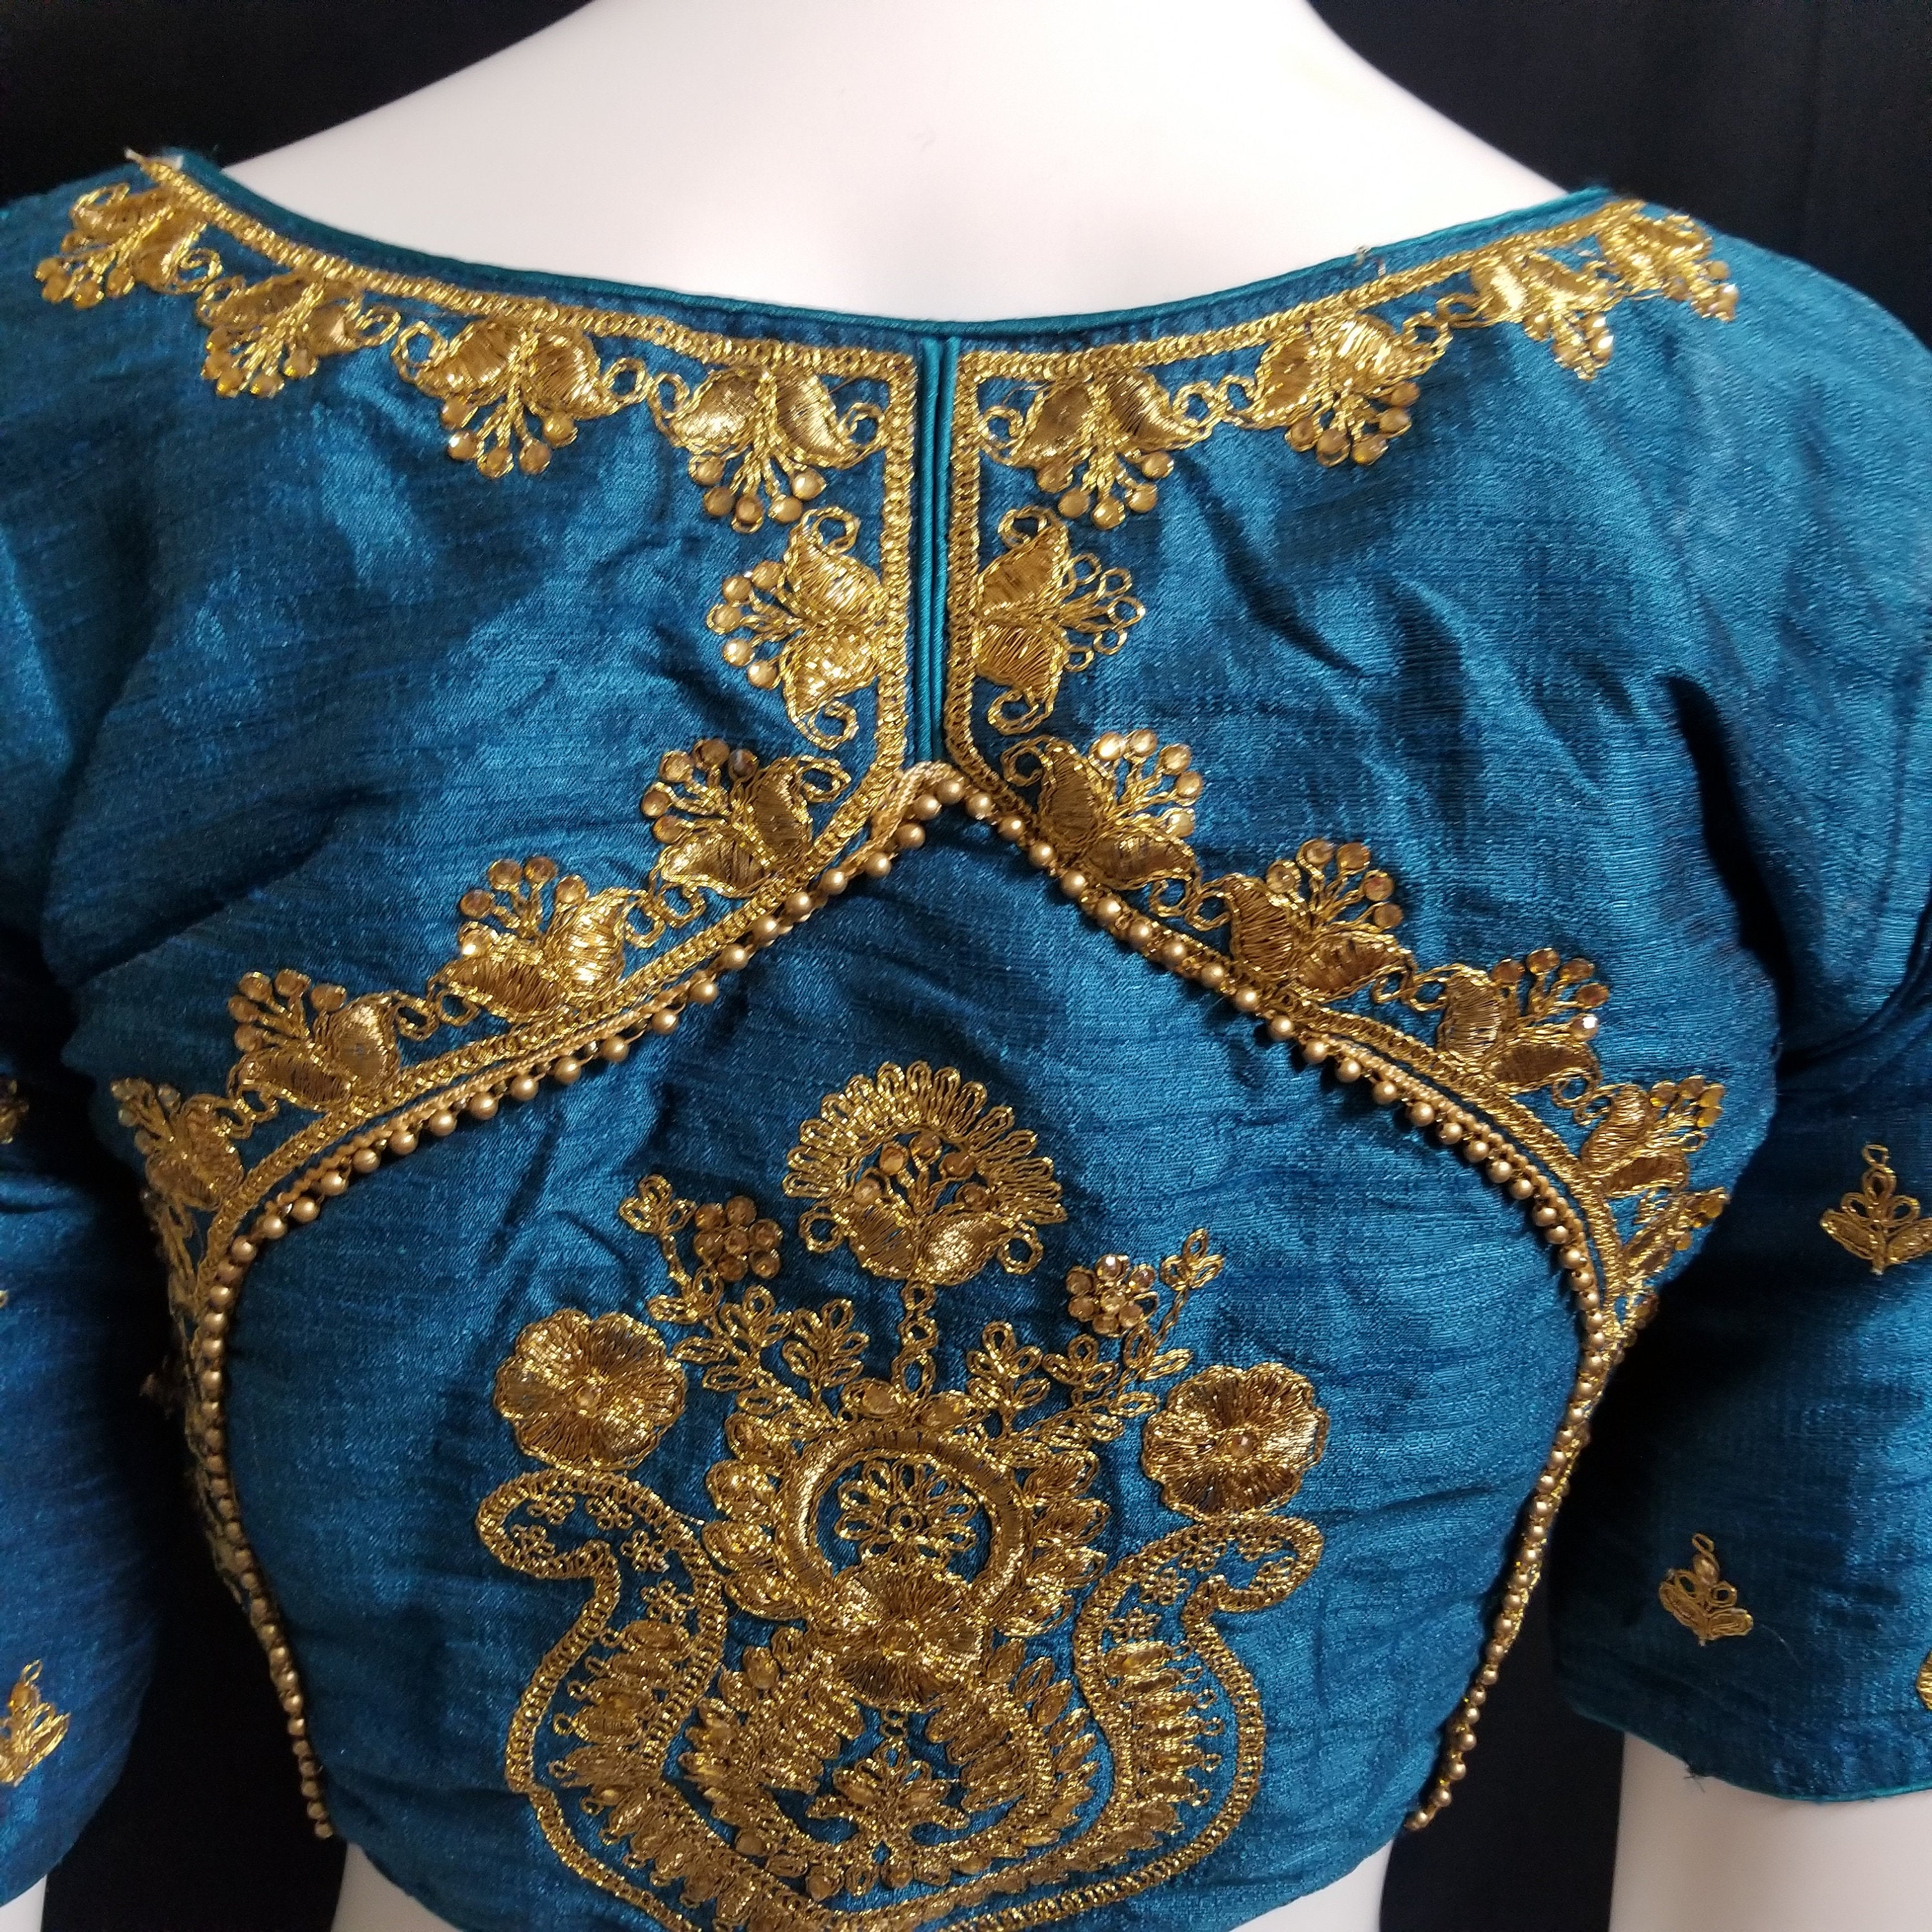 Readymade Saree Blouse - Peacock blue Color Embroidery work Silk base Blouse (with pad) - Size 38 (can alter 36, 40)